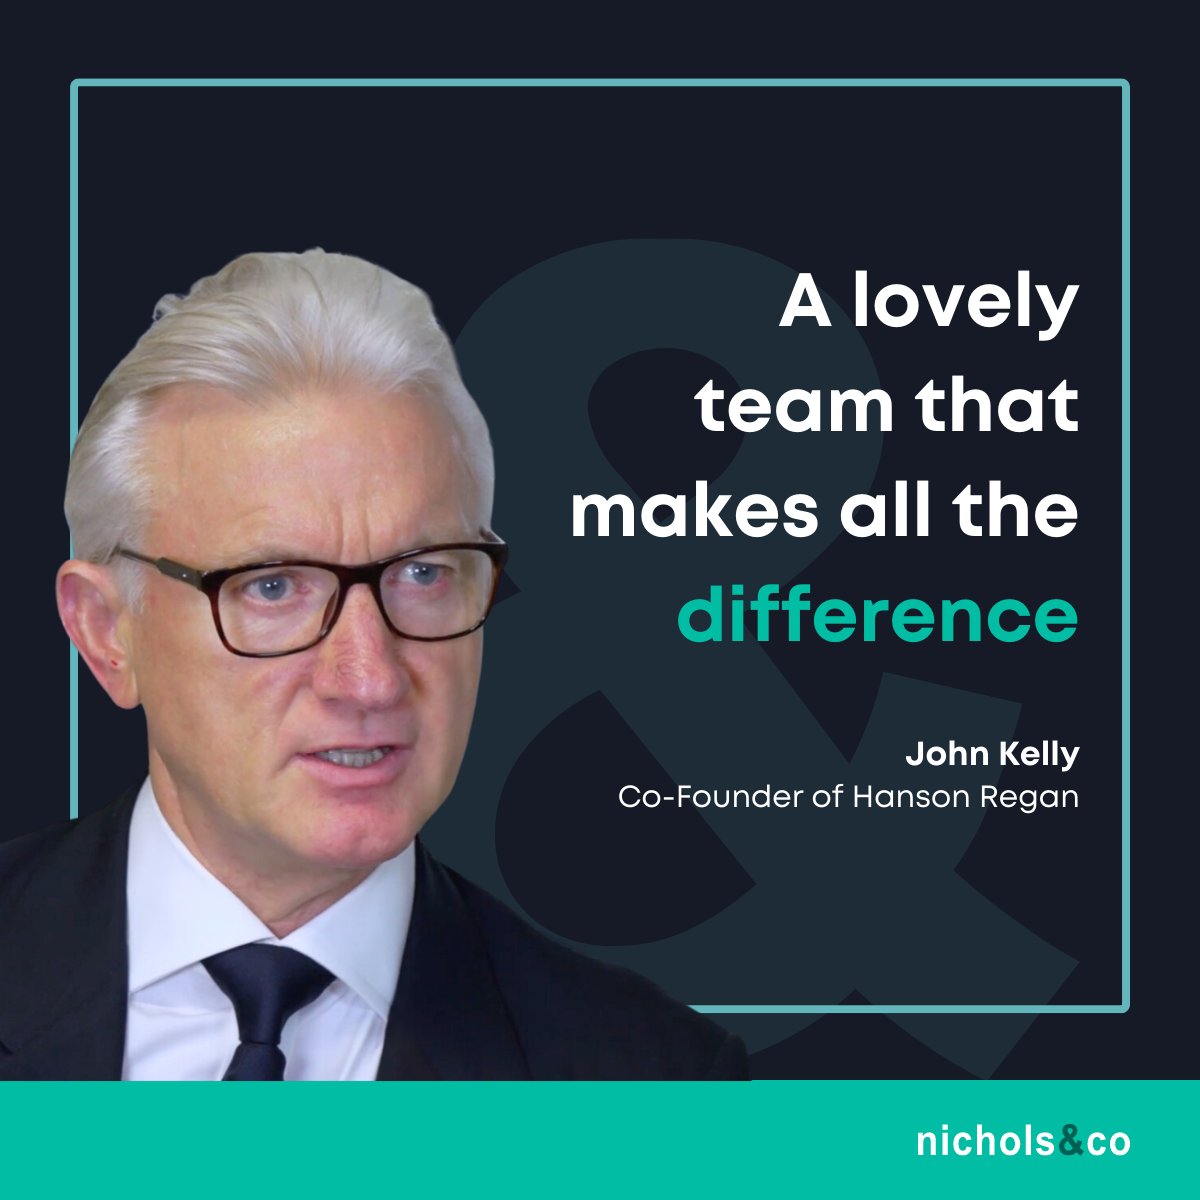 Ever wonder why companies across the UK rely on Nichols & Co for their accounting needs?

Hear it straight from John Kelly, co-founder of Hanson Regan, watch the full testimonial here.

bit.ly/3OIBBNK

#NicholsAndCo #UKAccountancy #ClientTestimonial #BusinessSuccess